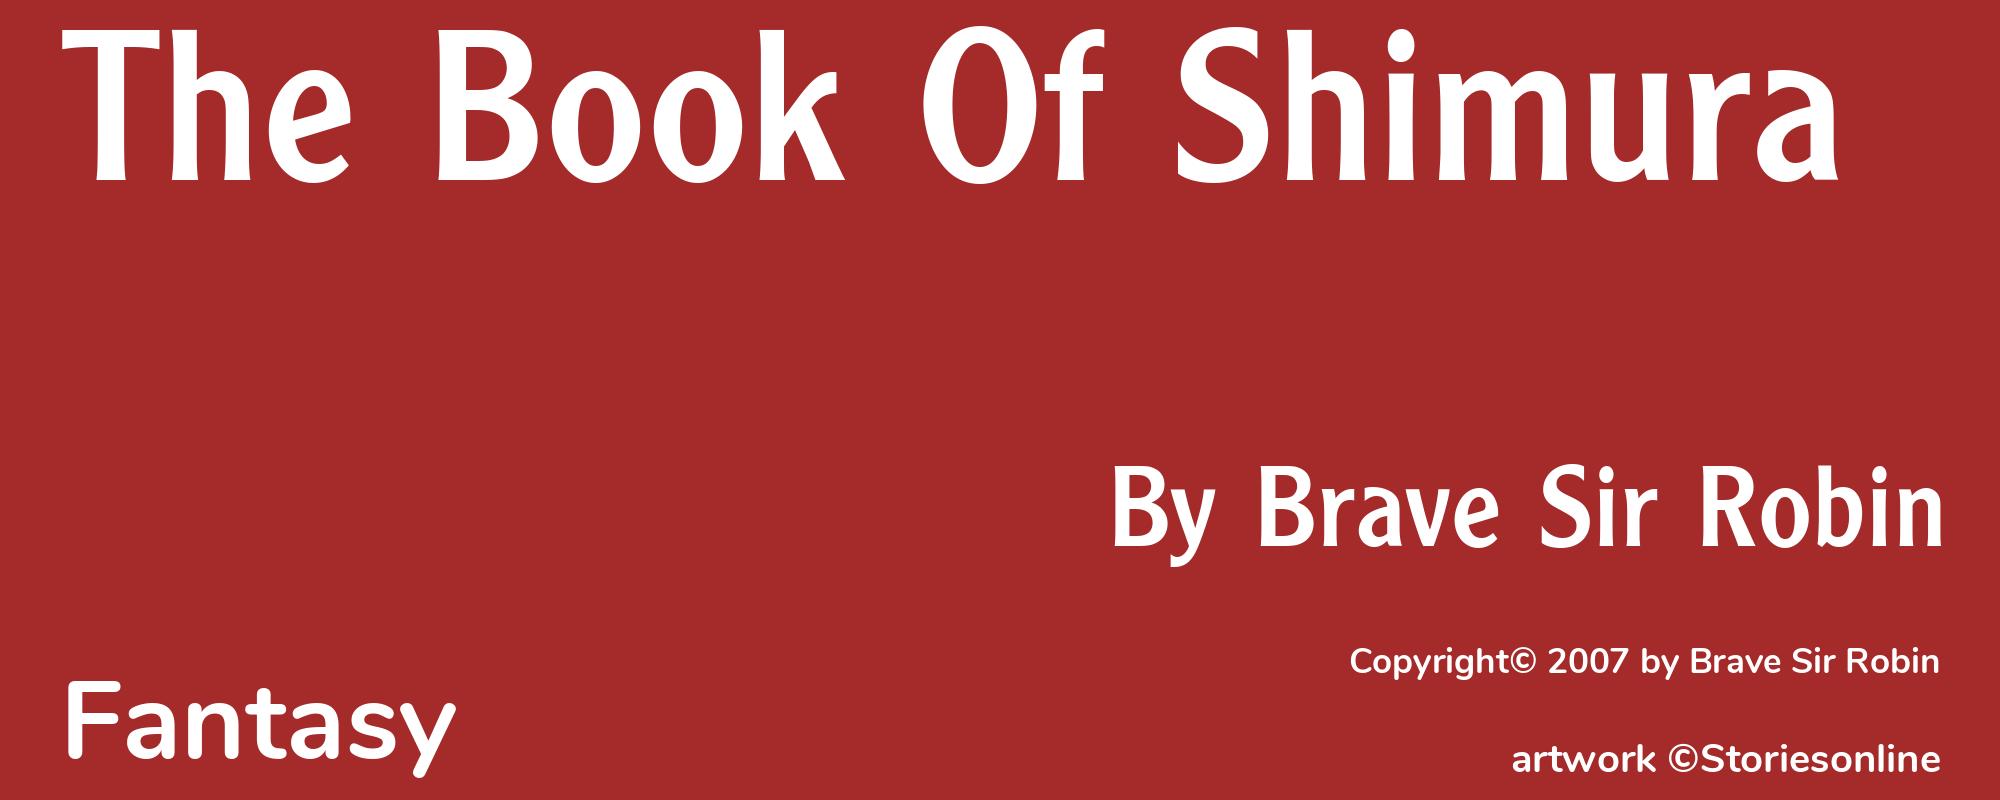 The Book Of Shimura - Cover